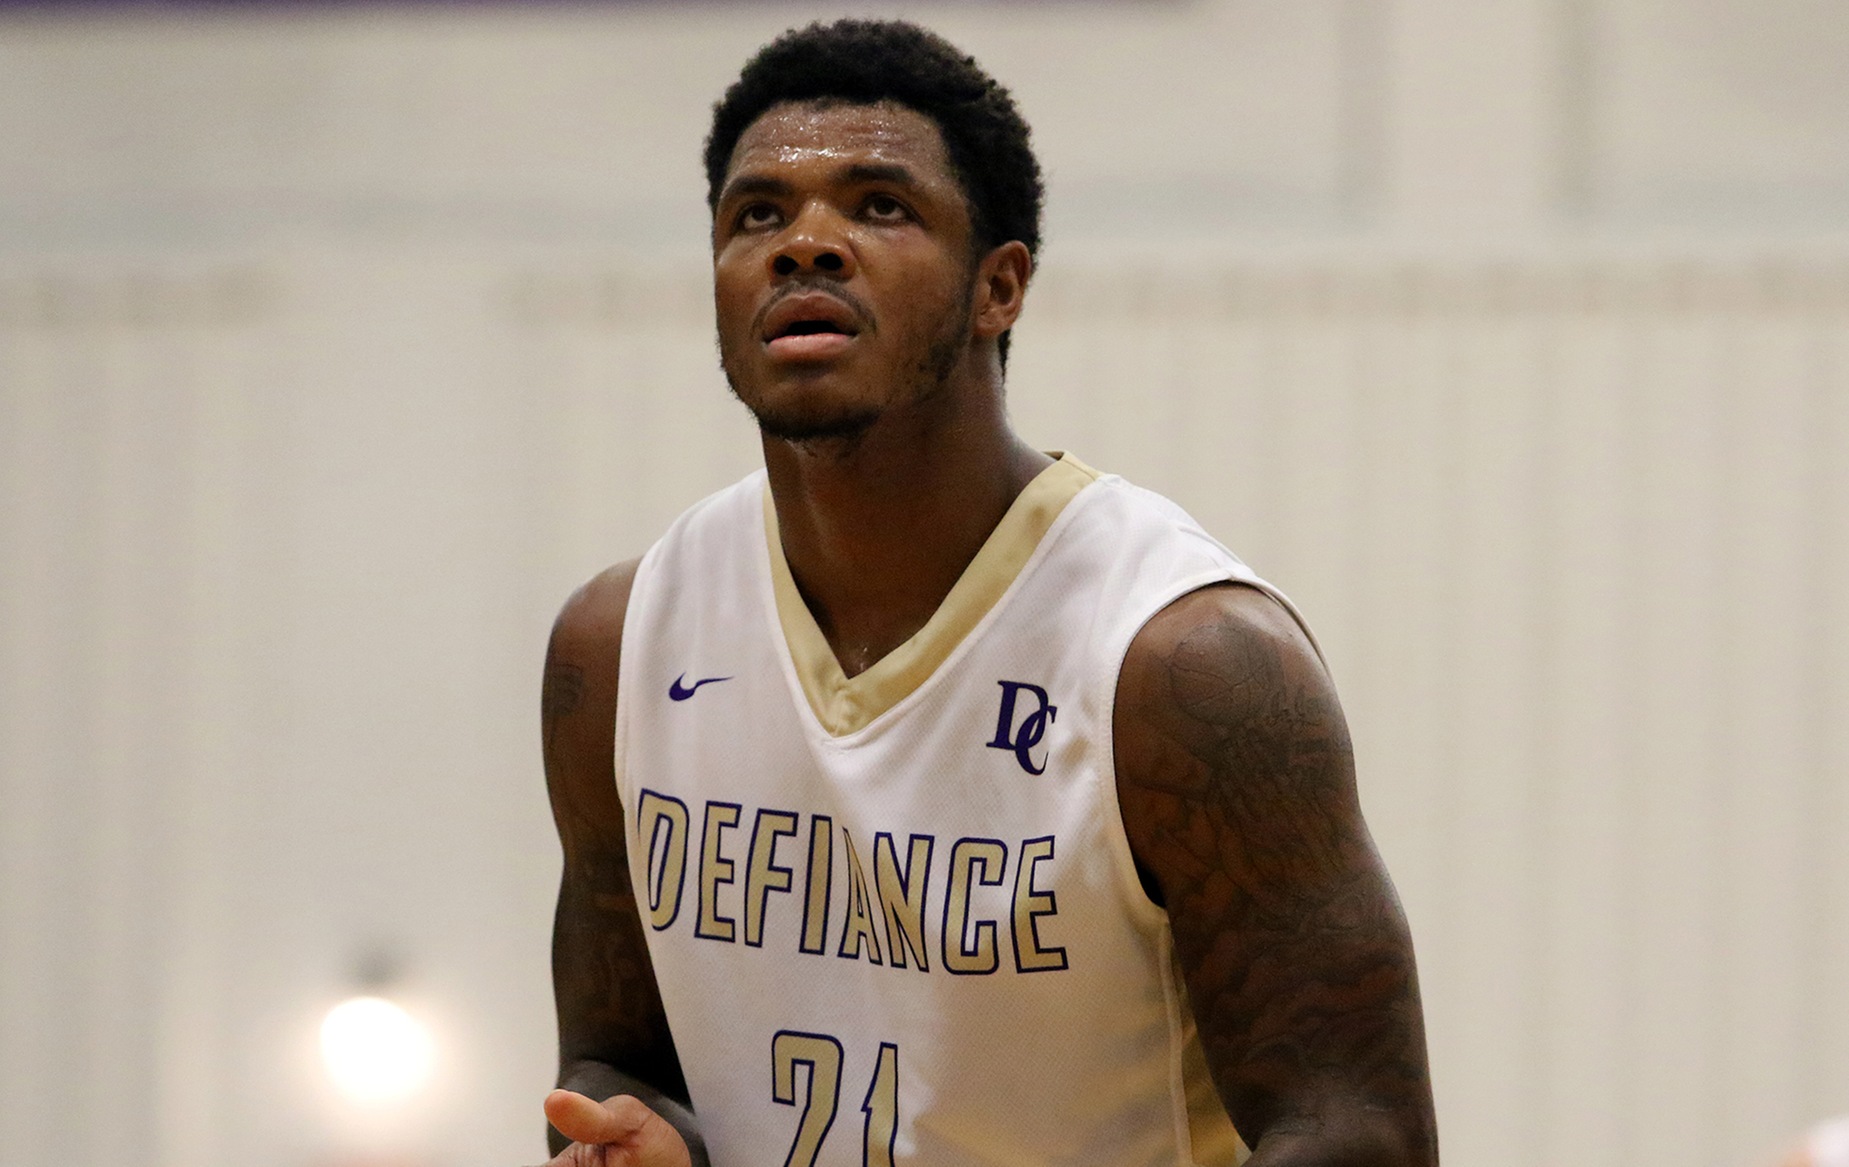 Defiance Defeats MSJ; Jackets Move Into Tie For First